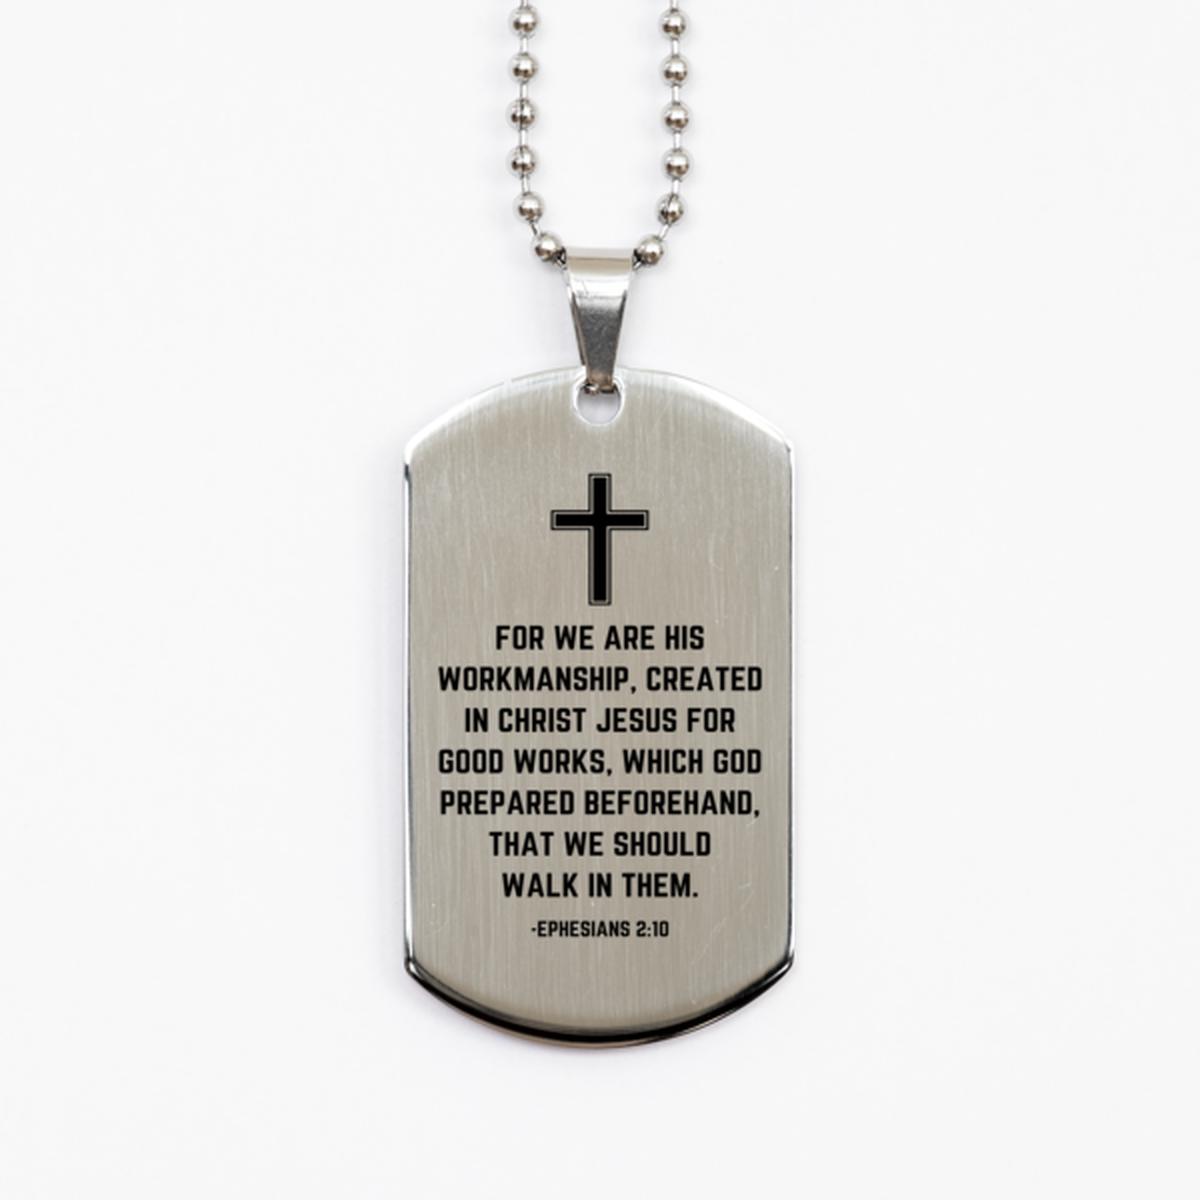 Baptism Gifts For Teenage Boys Girls, Christian Bible Verse Silver Dog Tag, For we are His workmanship, Confirmation Gifts, Bible Verse Necklace for Son, Godson, Grandson, Nephew